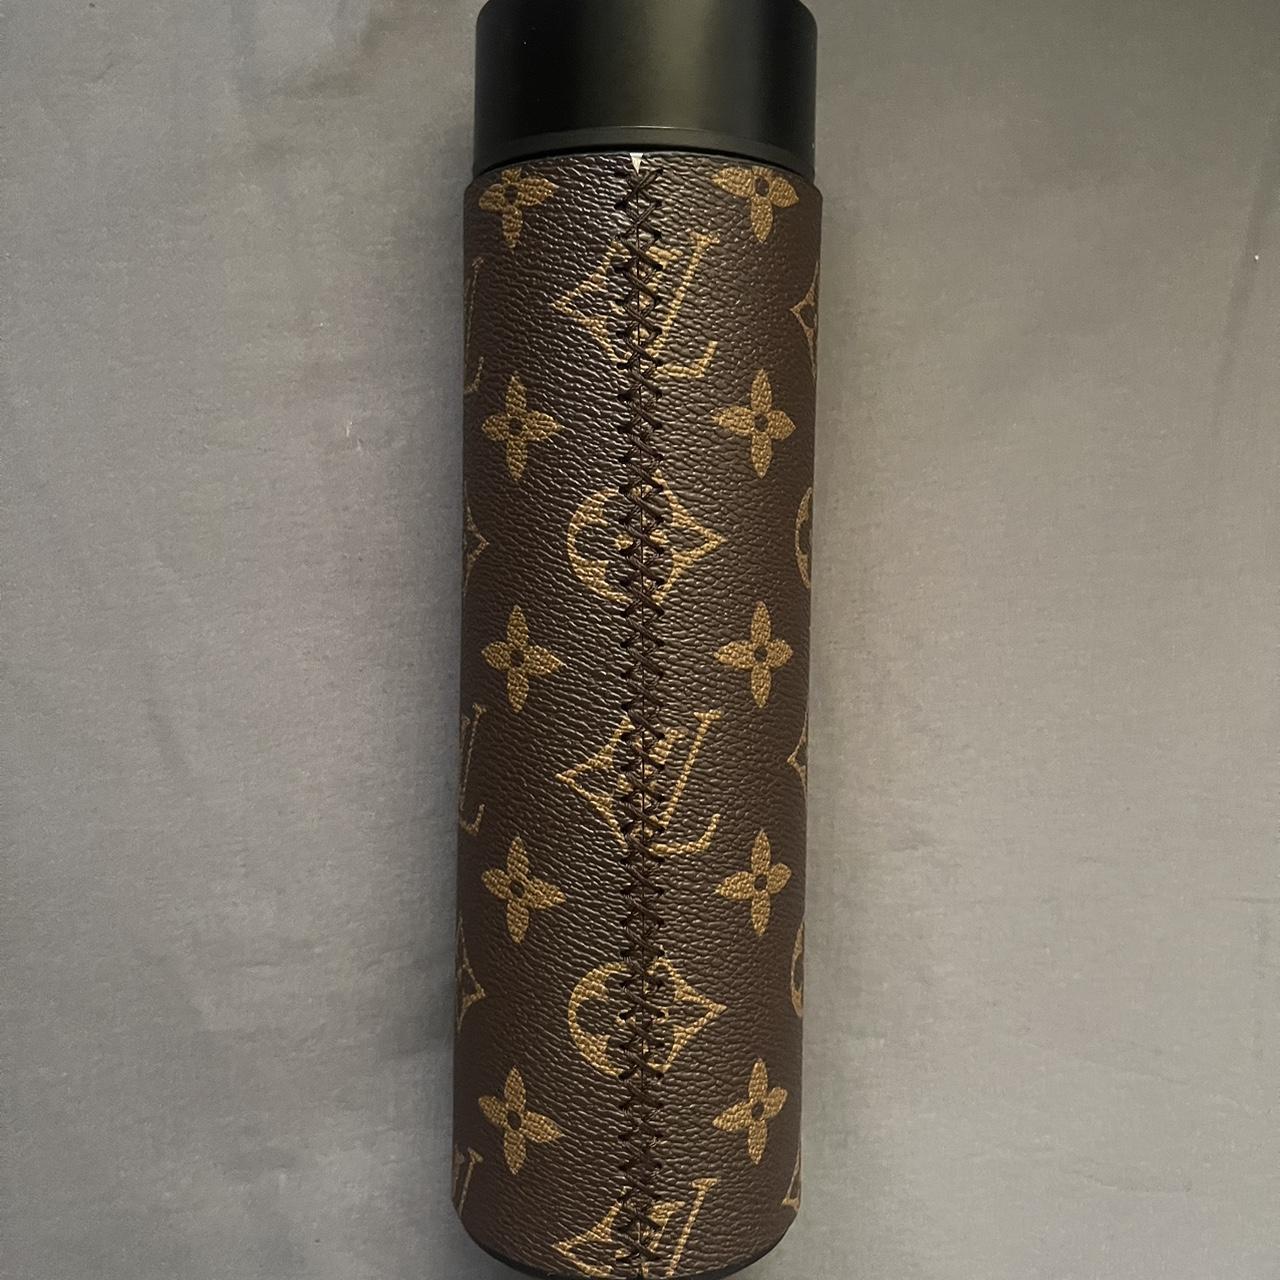 Louis Vuitton Flask Holds hot and cold Cap has led - Depop